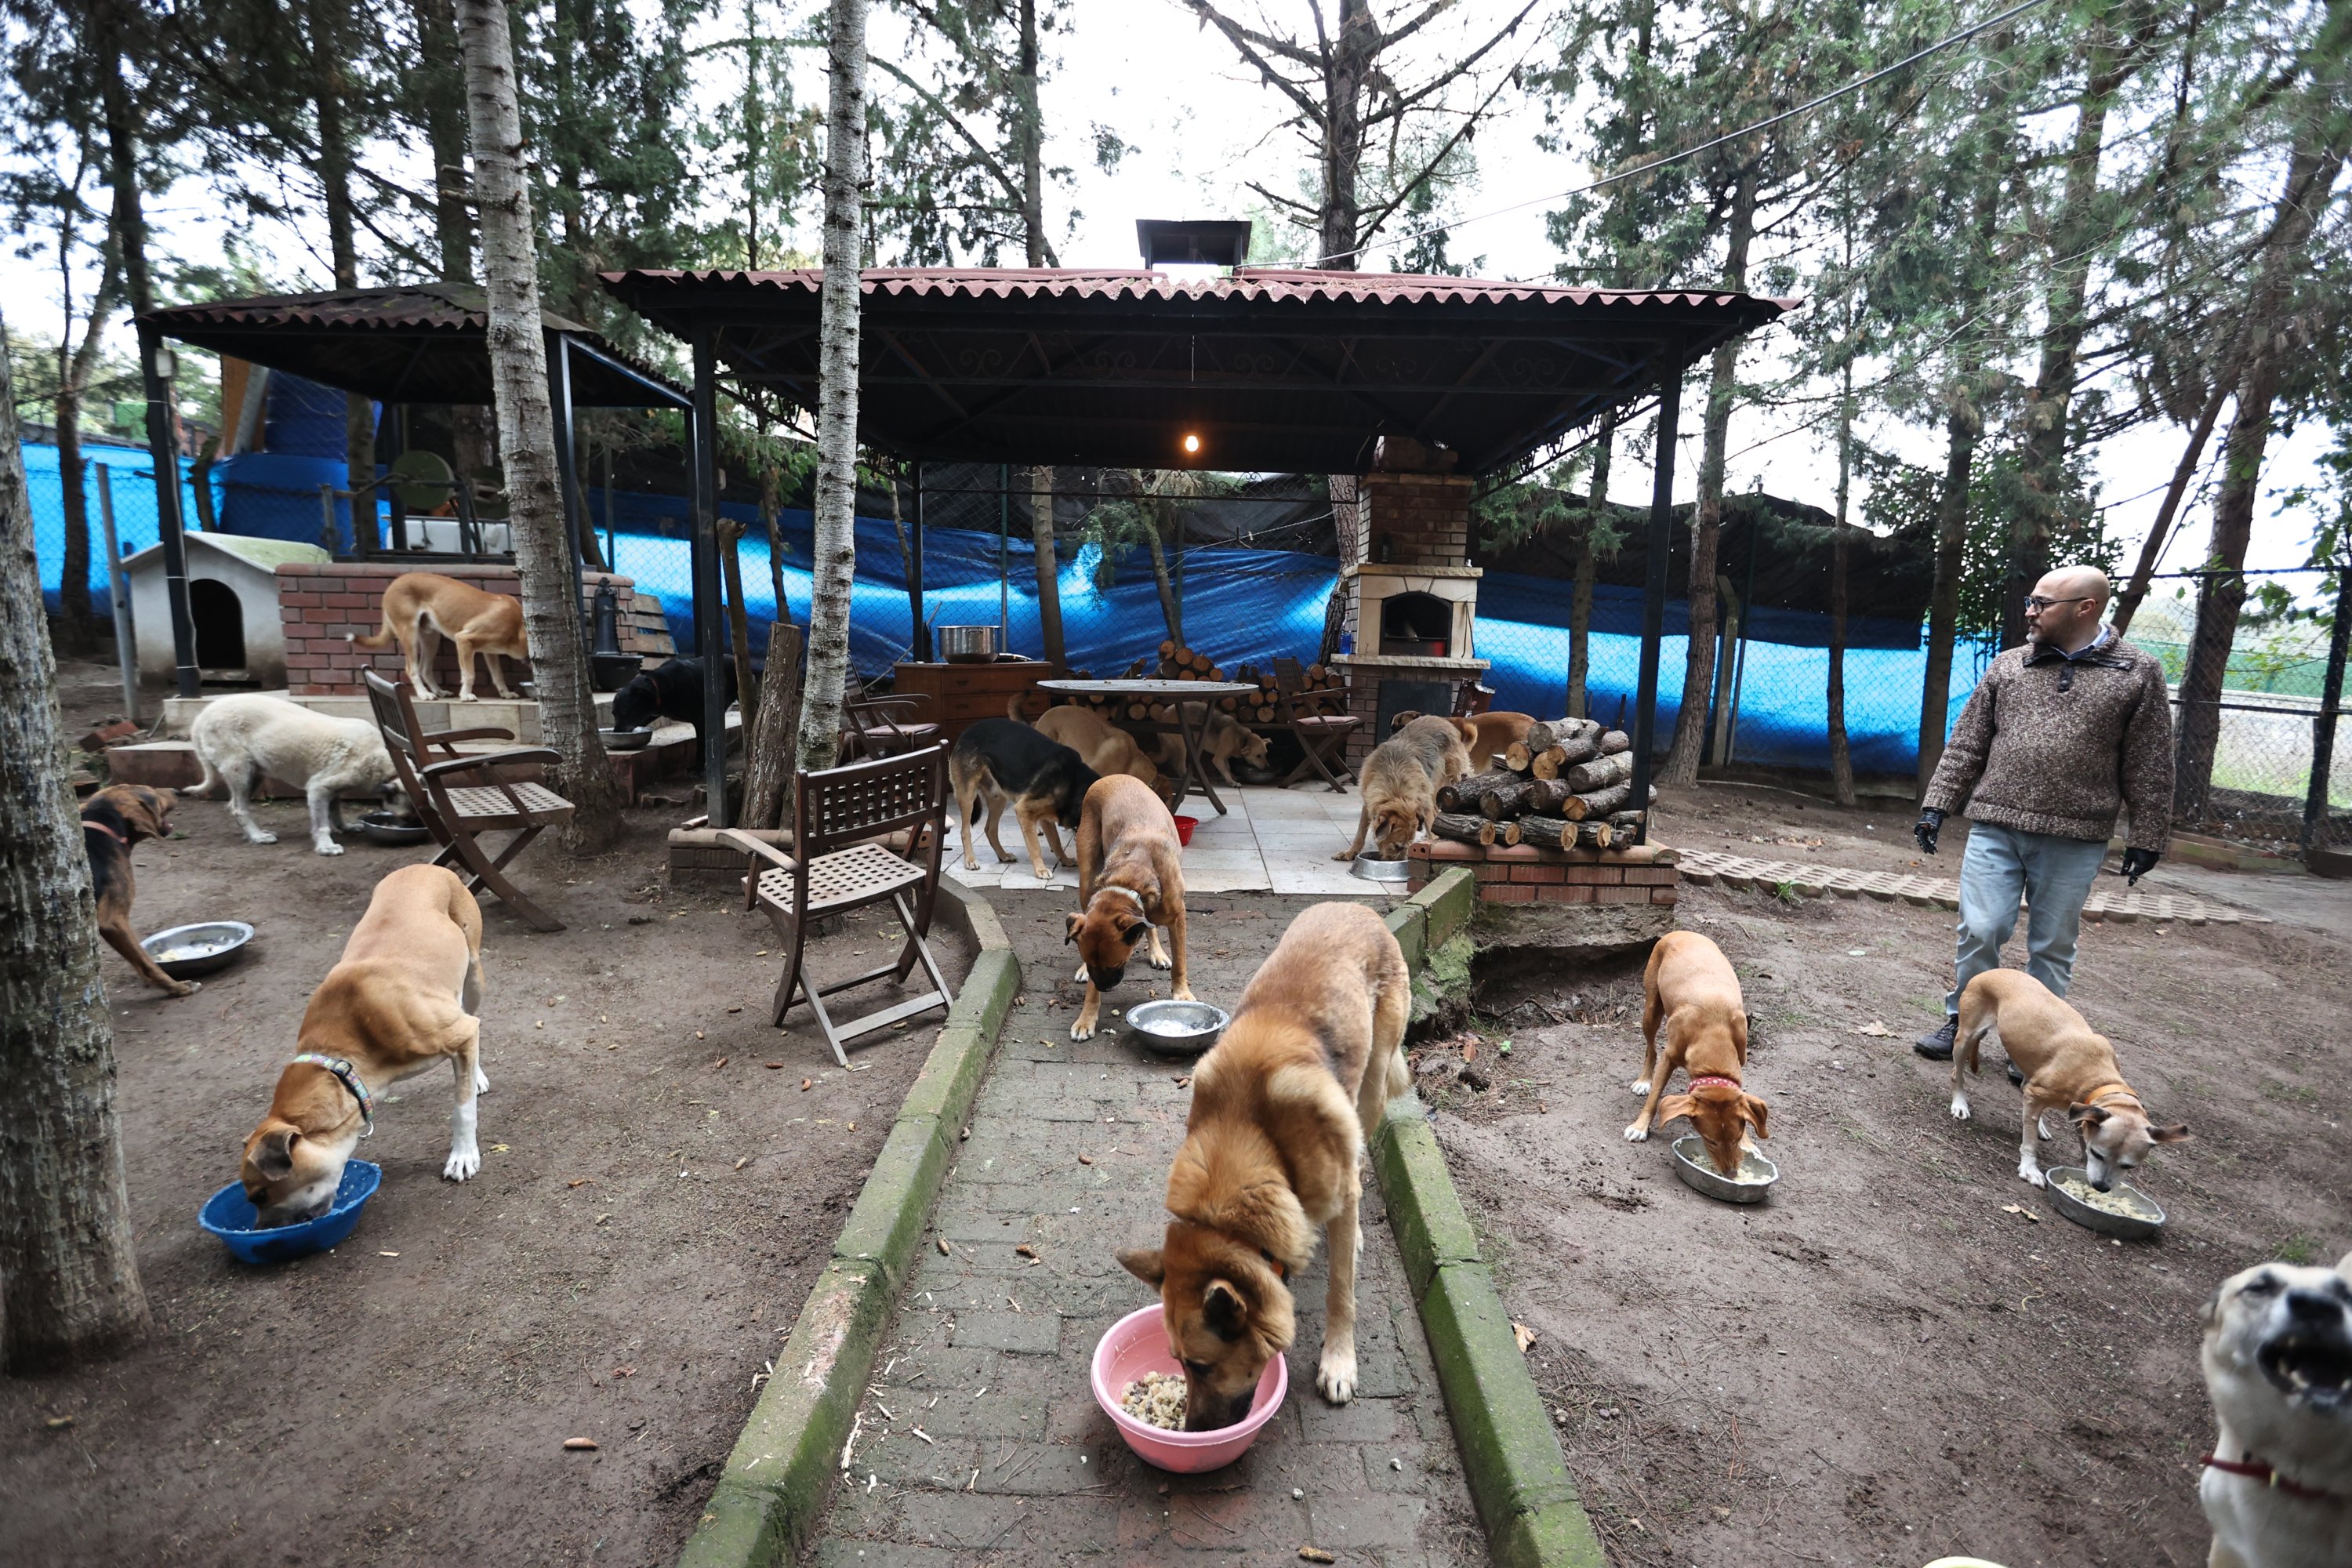 Turkish animal lover makes village home for strays | Daily Sabah